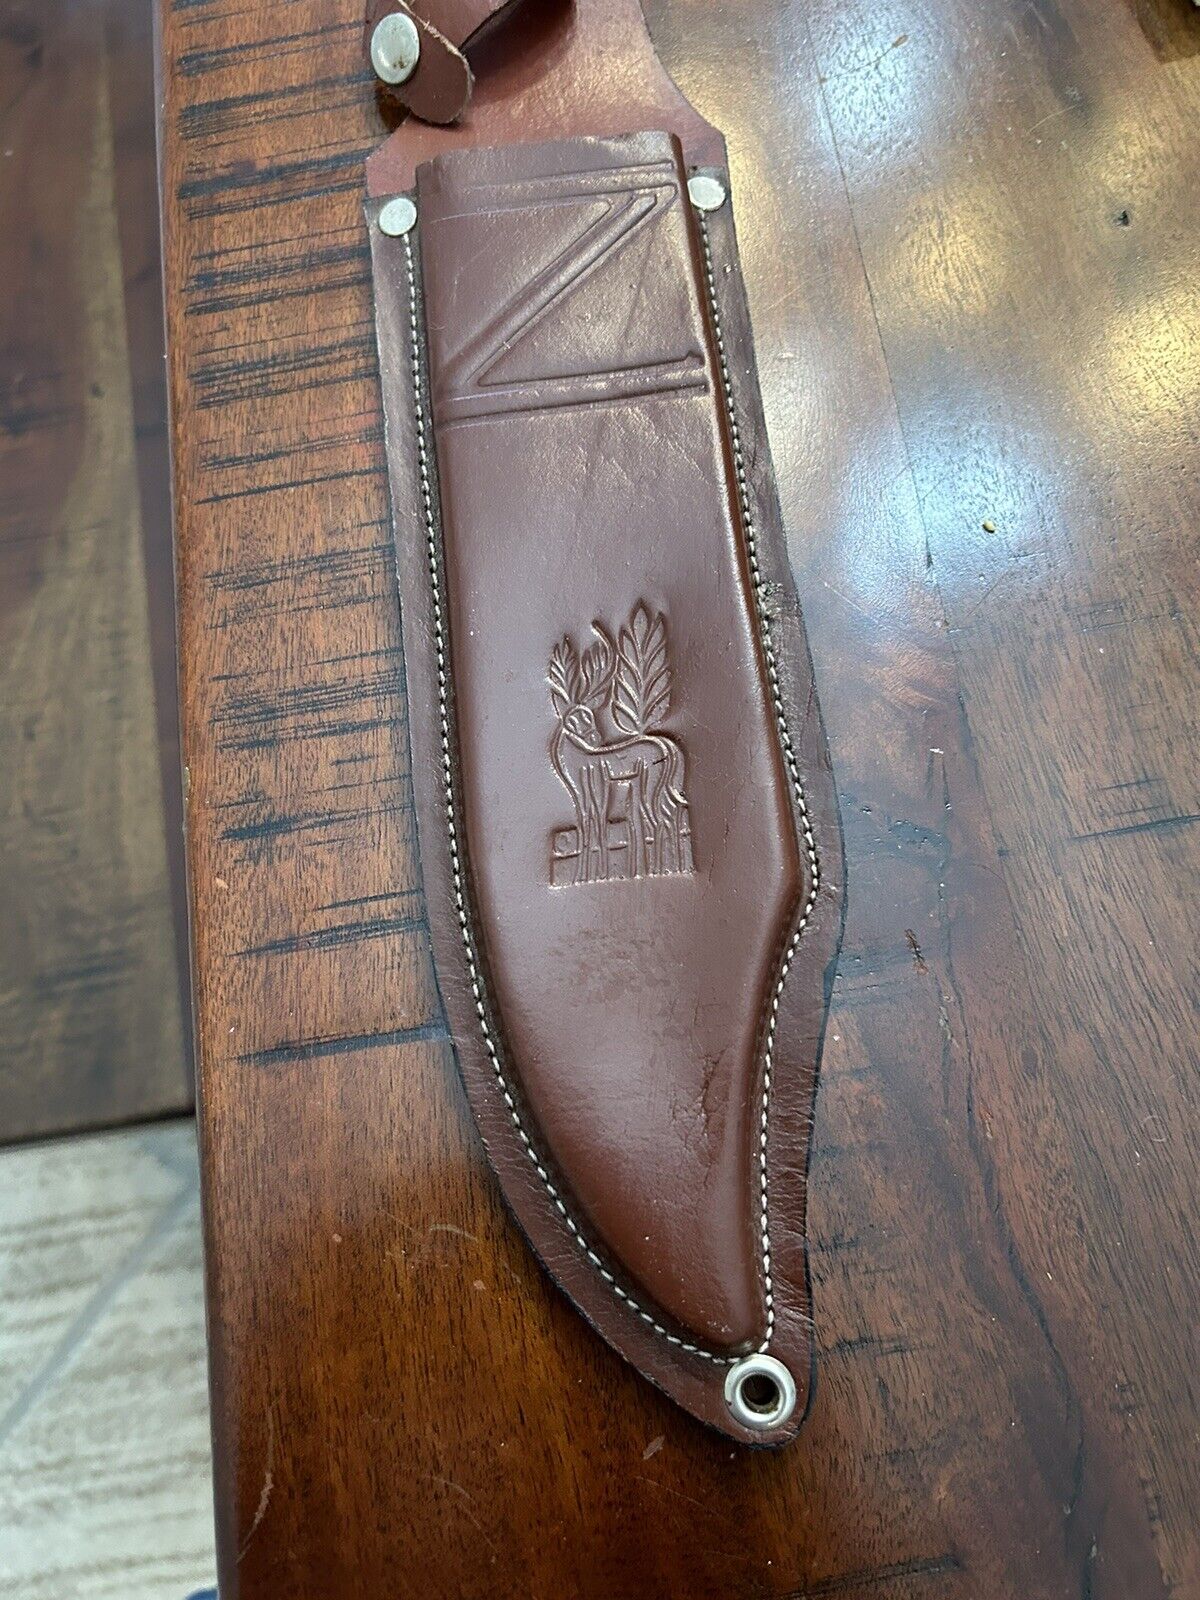 Title BROWN LEATHER SHEATH FOR Hunting Knife